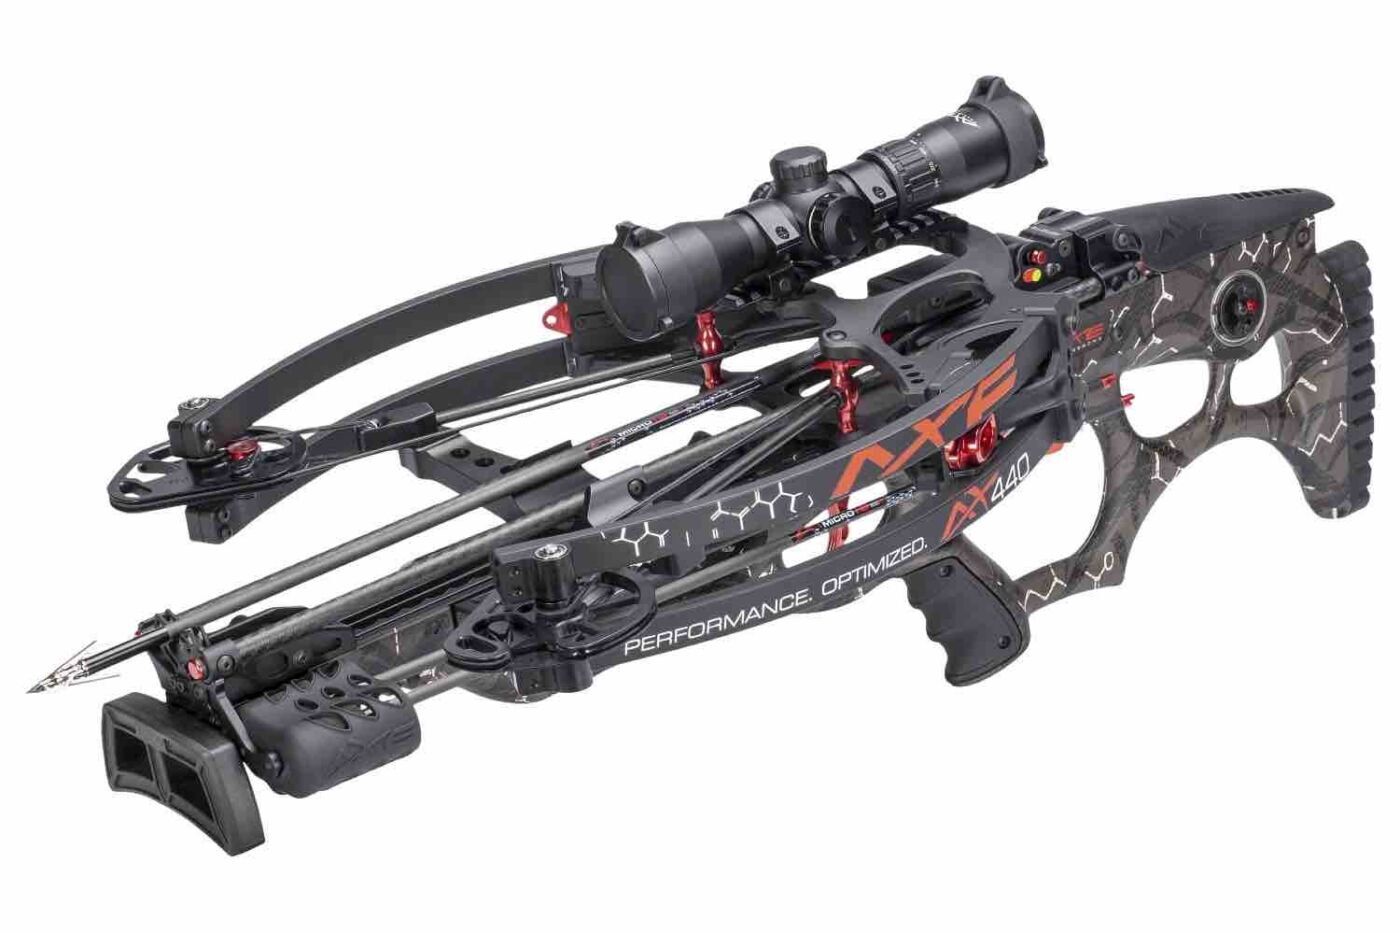 Crossbow: Best Cross bows For Sale In Canada - For Targets & Hunting